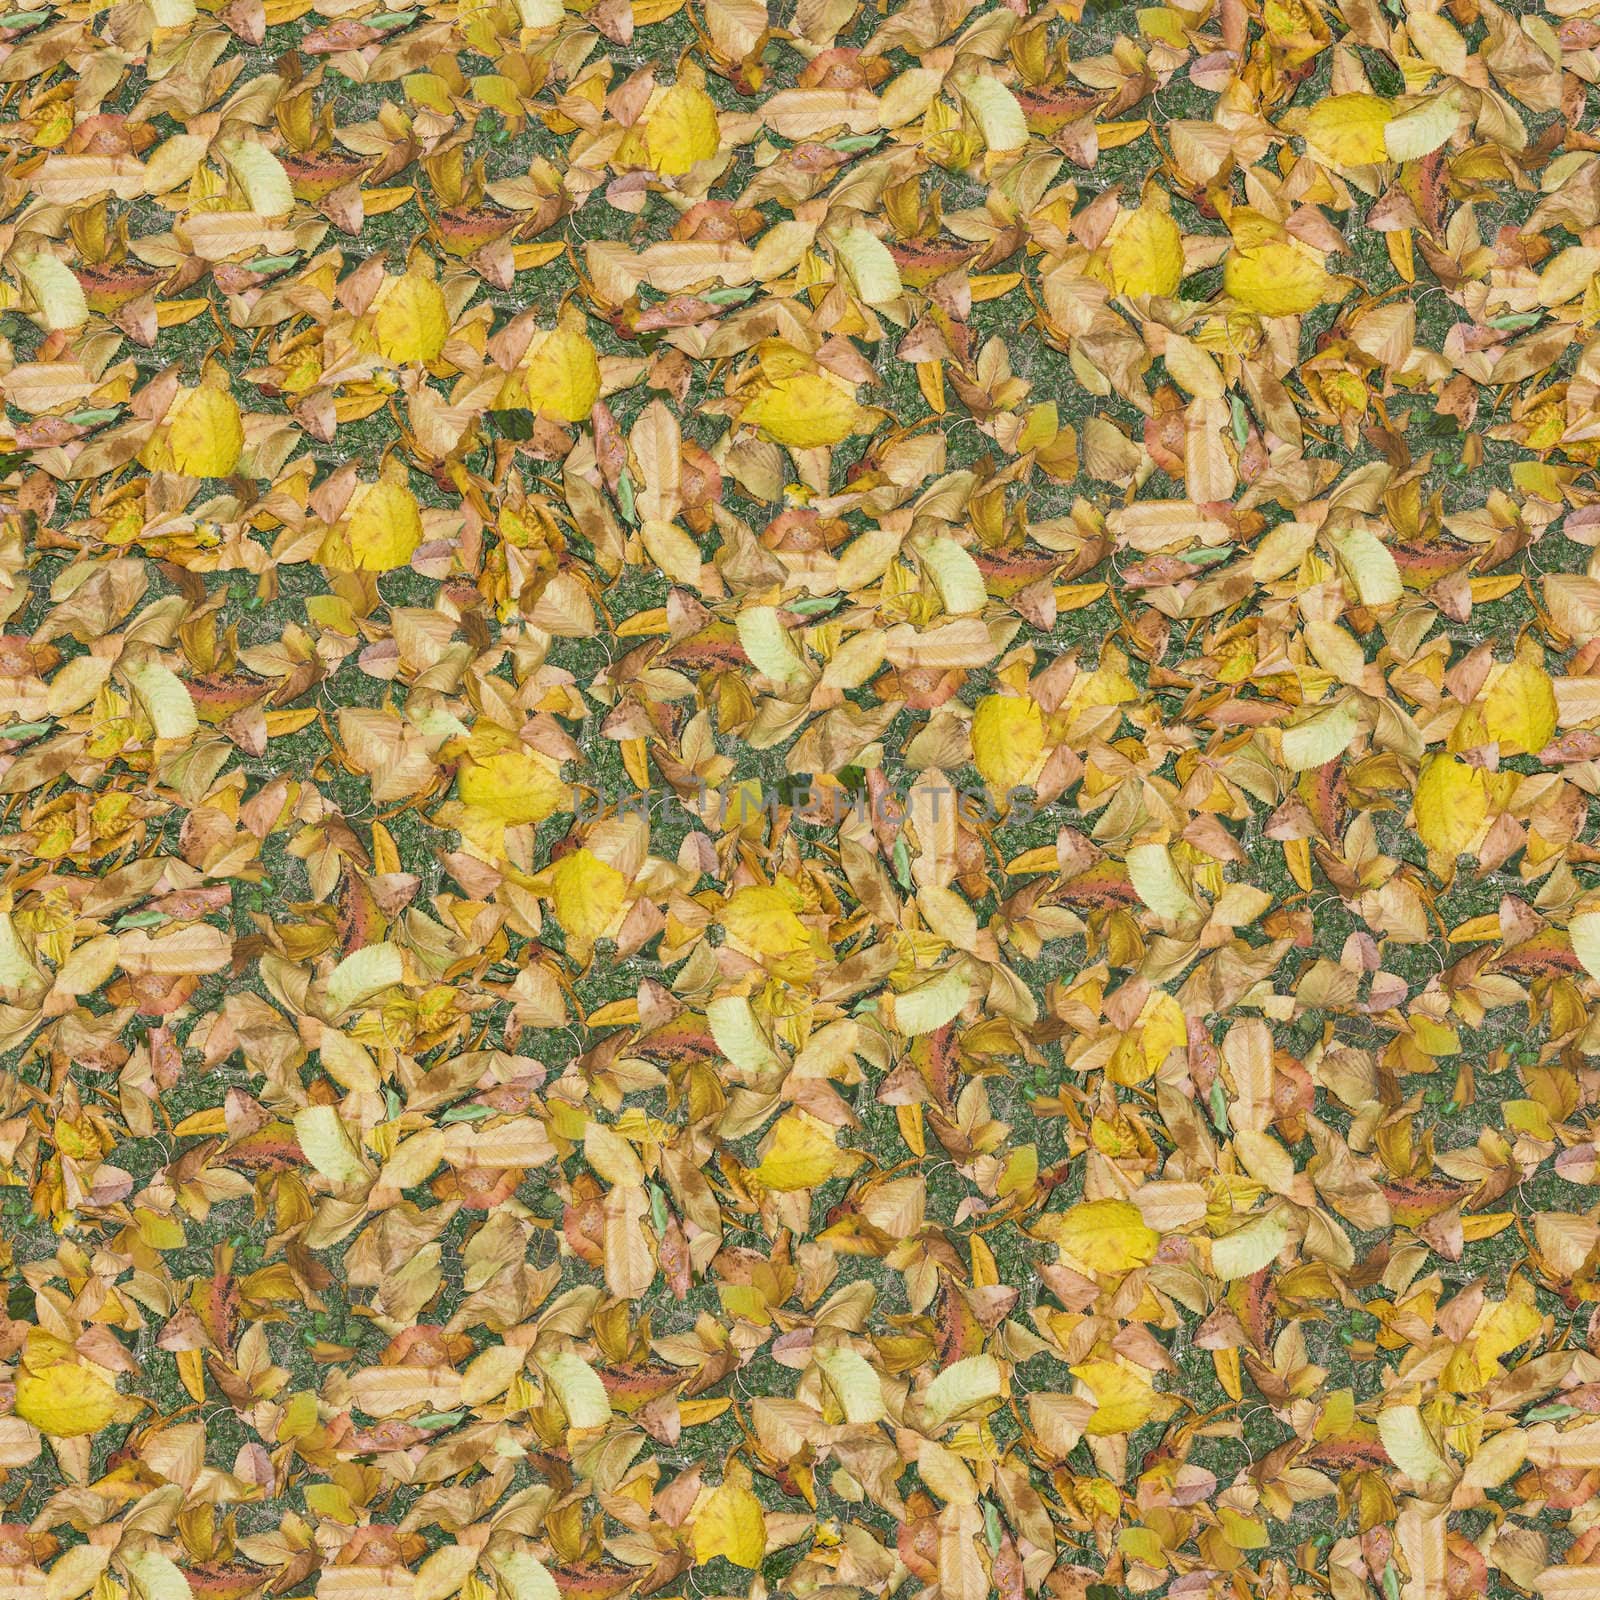 Seamless pattern made of dry leaves. It's composable like tiles without visible connecting line between parts